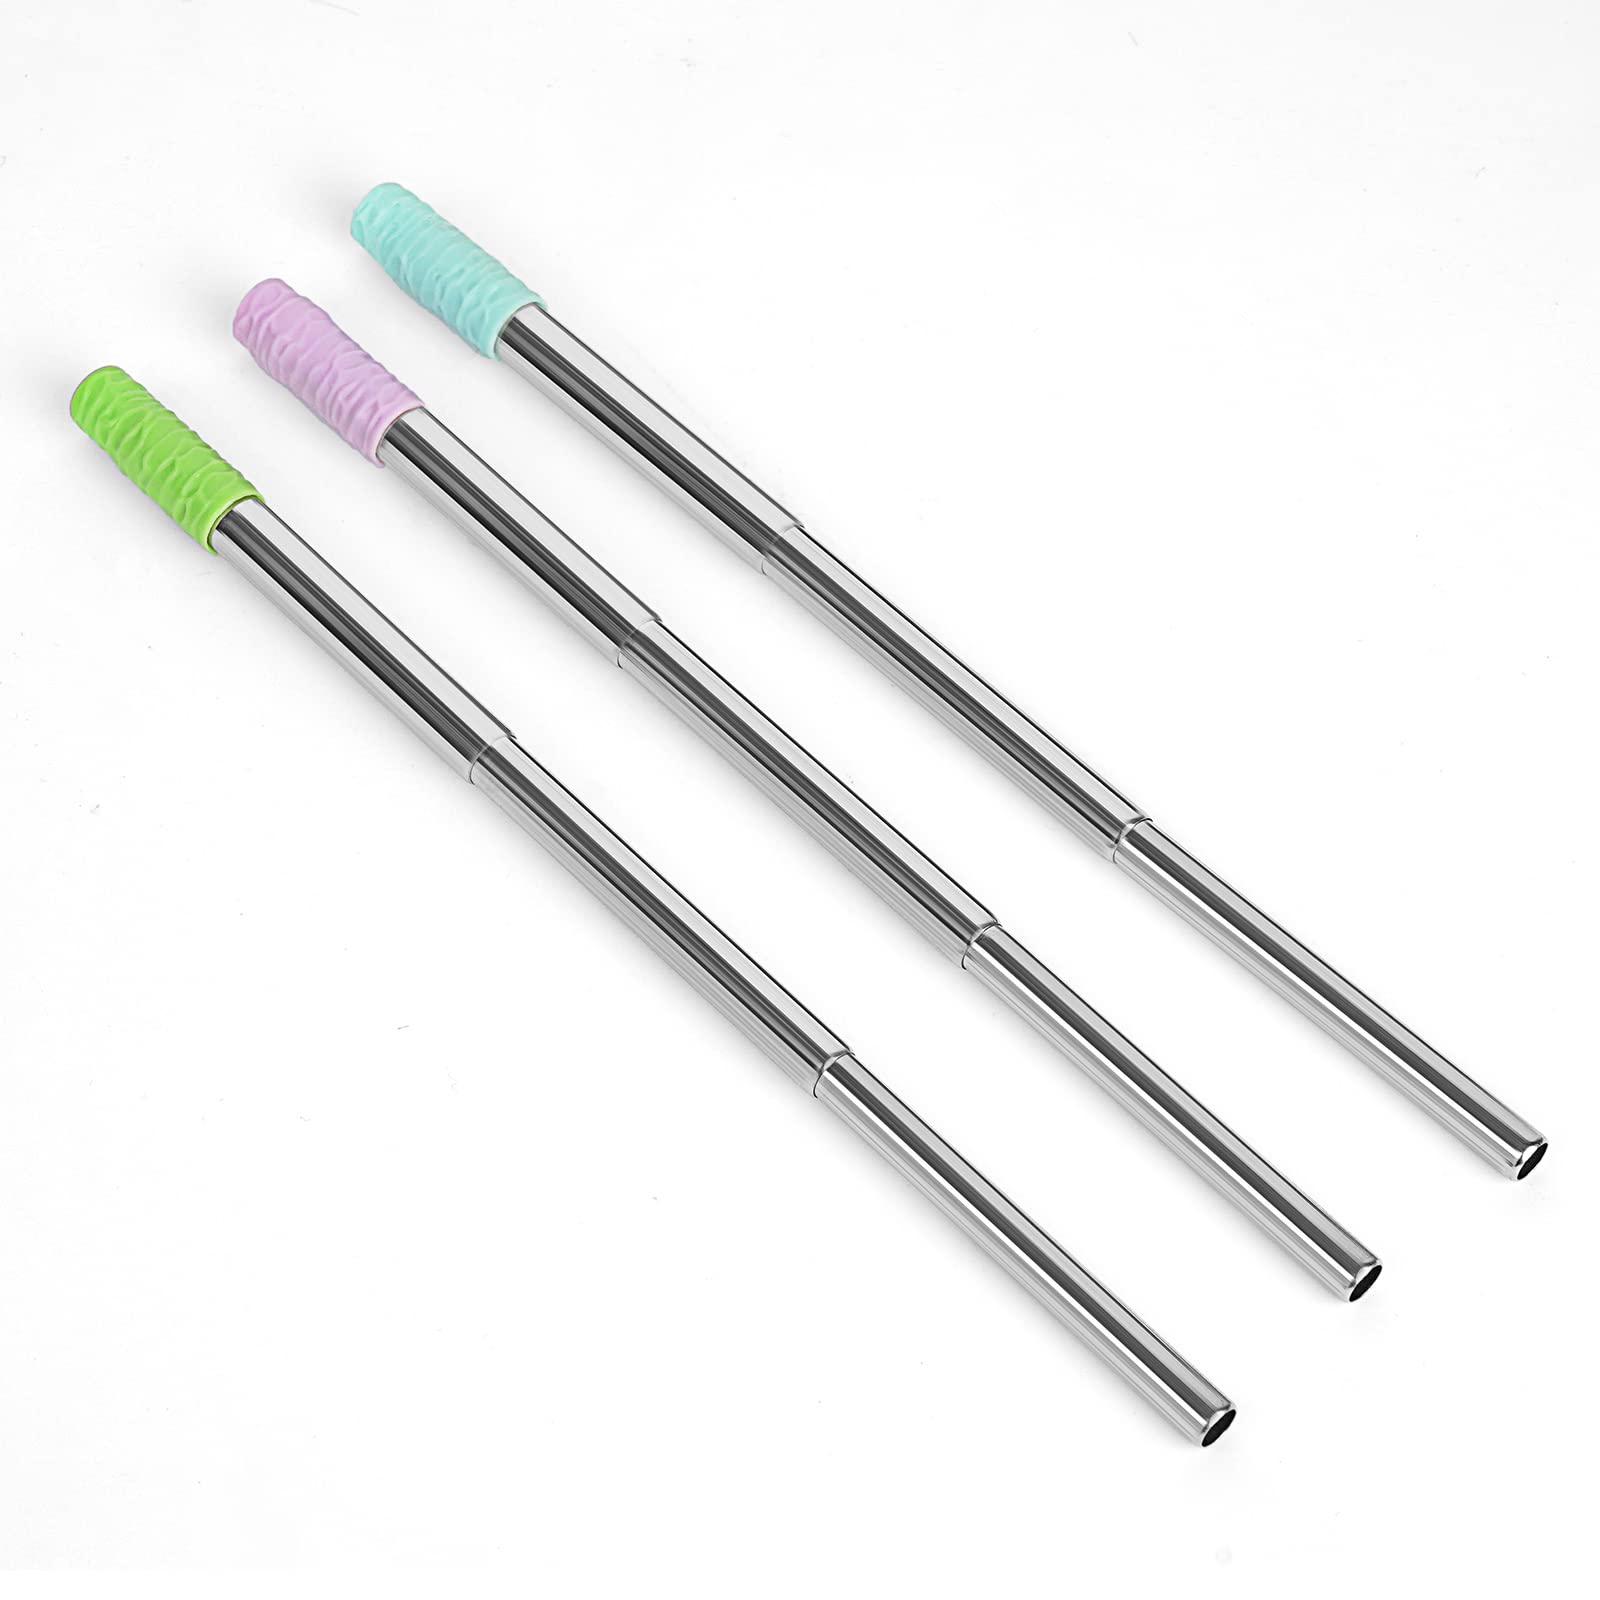 ReignSword 3 Pack Reusable Collapsible Straws with Silicone Tip, Telescopic Portable Stainless Steel Reusable Keychain Drinking Straws with Case, Cleaning Brush, for Travel, School, Picnic